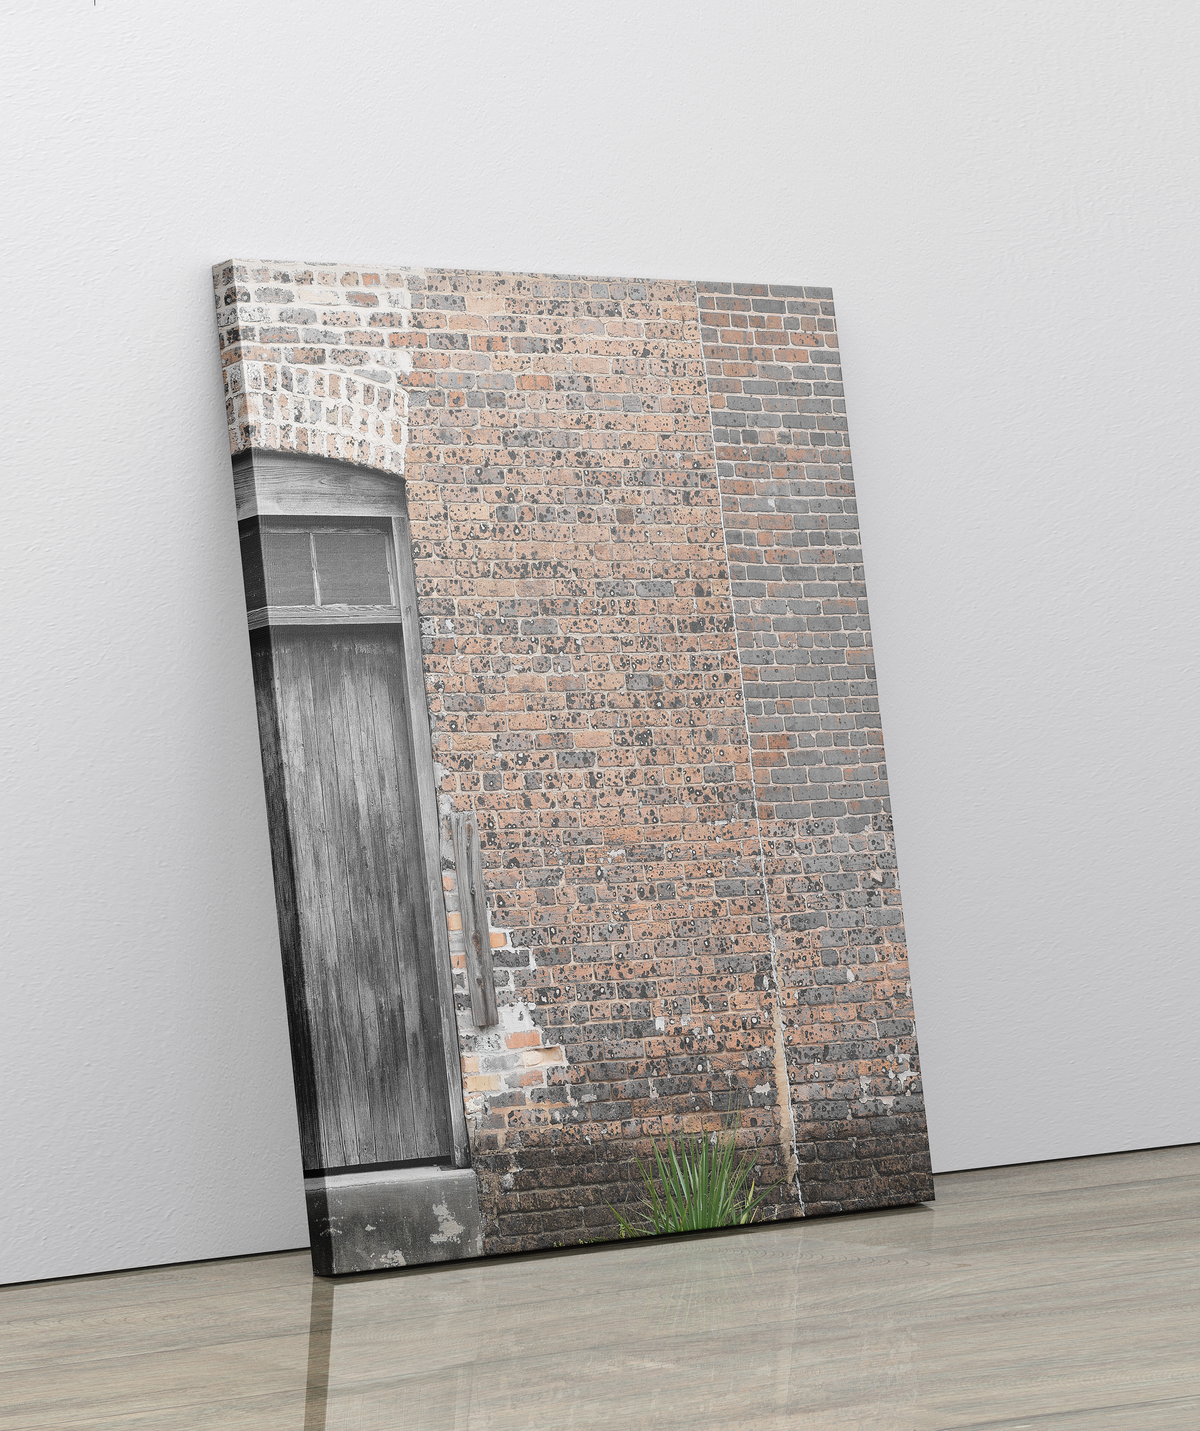 Detailed image of brick wall with distressed wood door.   NOTES:  Brick Wall Image  Distressed Wood Door Made to Order Designer: @Makkersmedia BACKDROP:  Produced in-house. Printing by HP commercial wide-format printers. MATERIAL:  Aurora Expressions Poly/Cotton Canvas with Satin/Matte Finish  Base Color: White